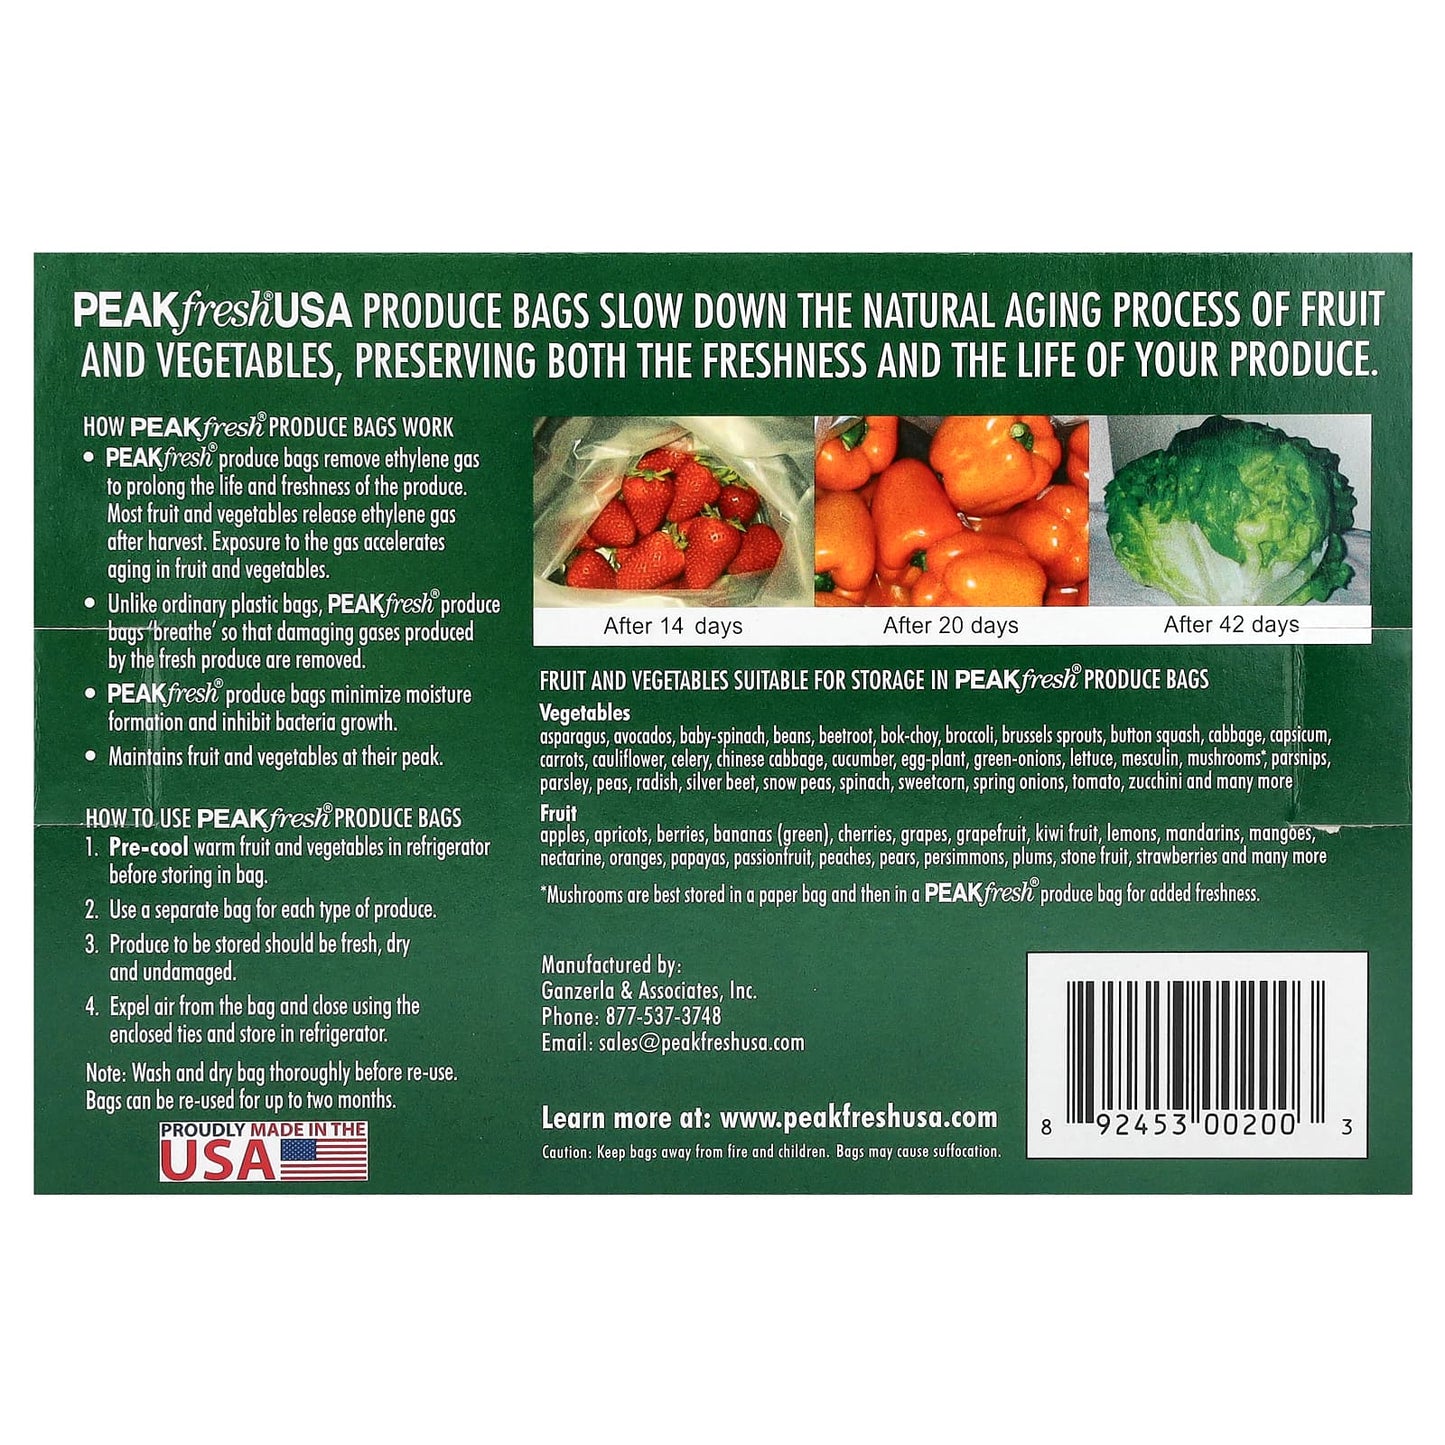 PEAKfresh USA, Produce Bags with Twist Ties, 10 Re-Usable Bags